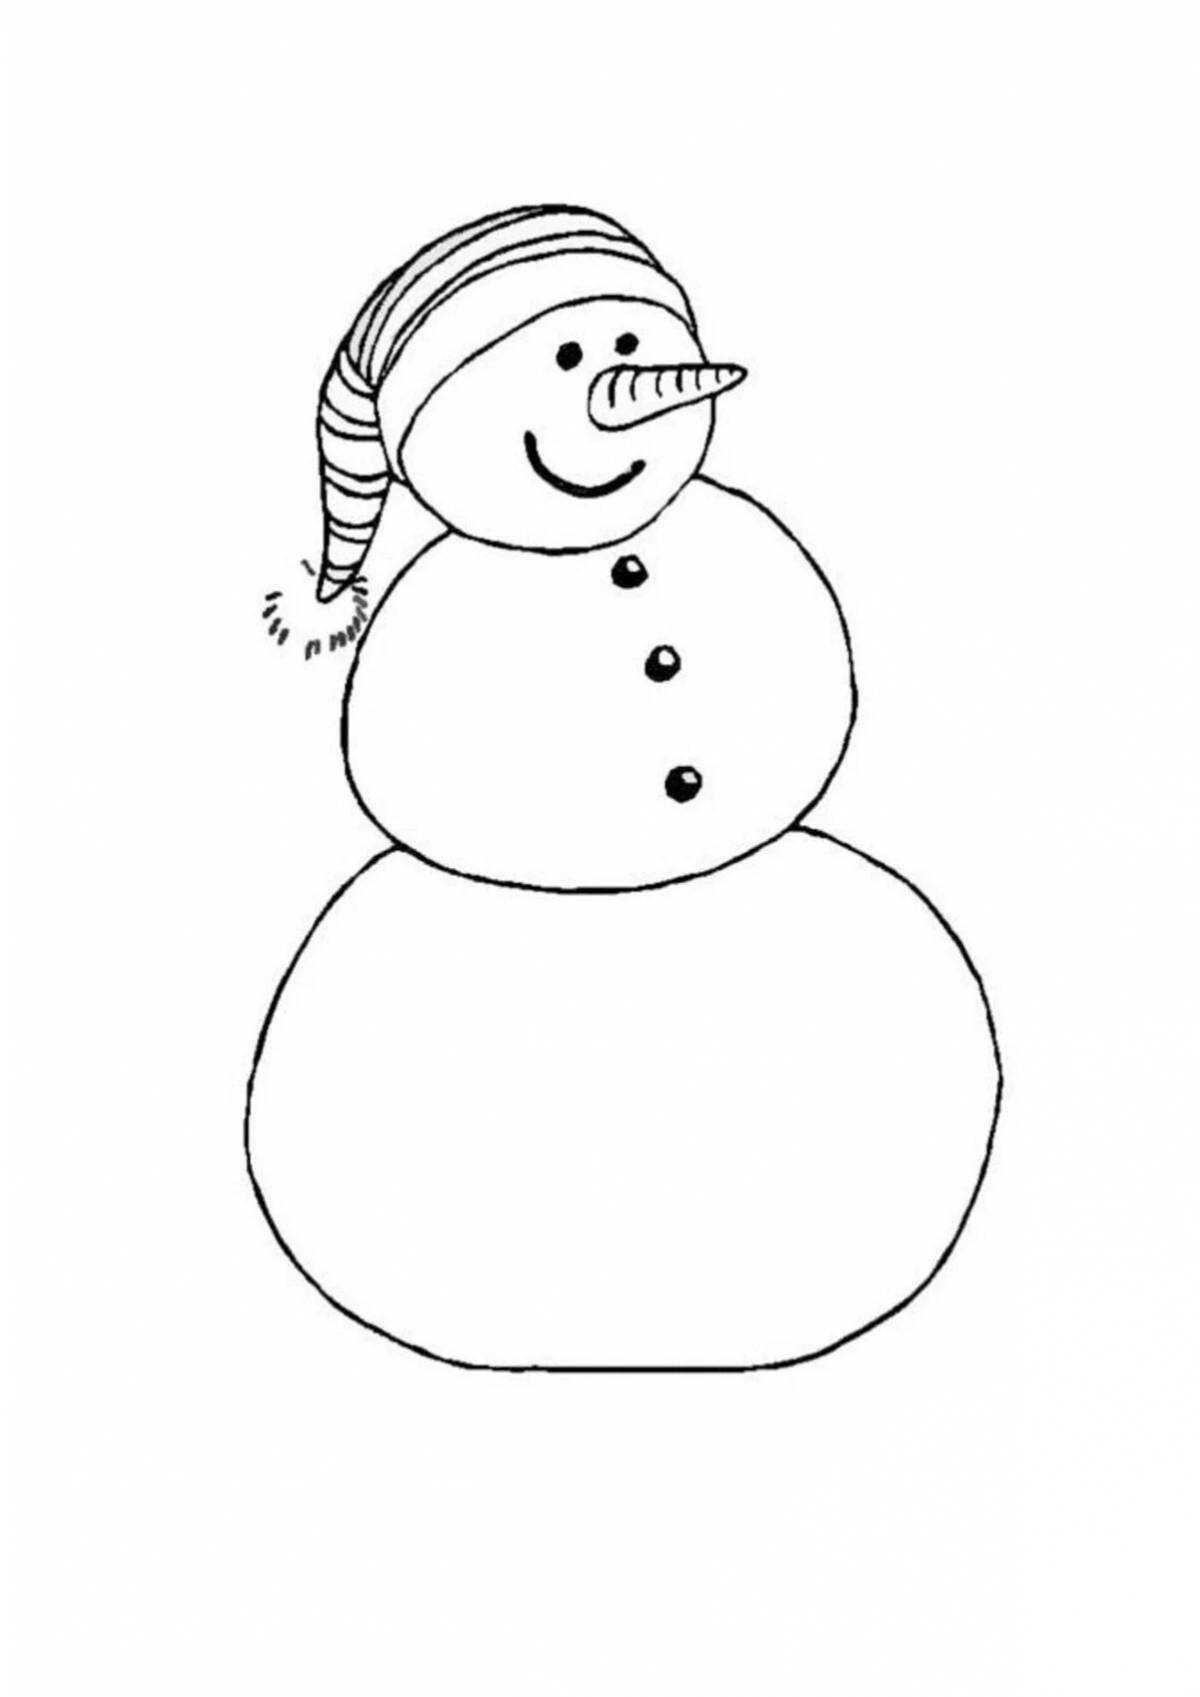 Grinning snowman without nose